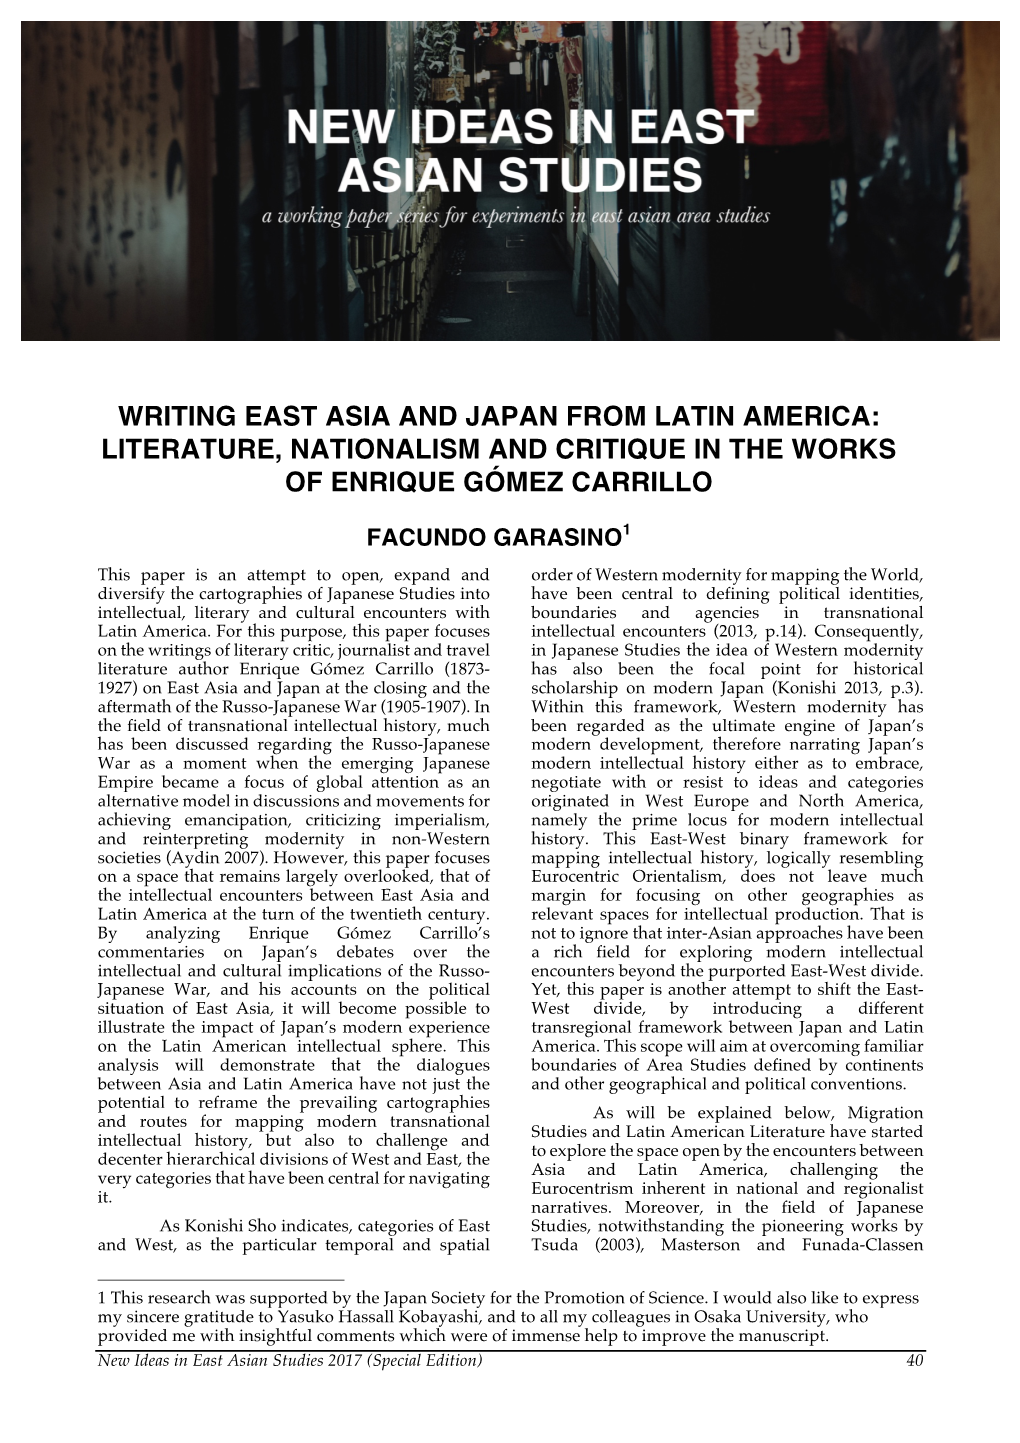 Writing East Asia and Japan from Latin America: Literature, Nationalism and Critique in the Works of Enrique Gómez Carrillo